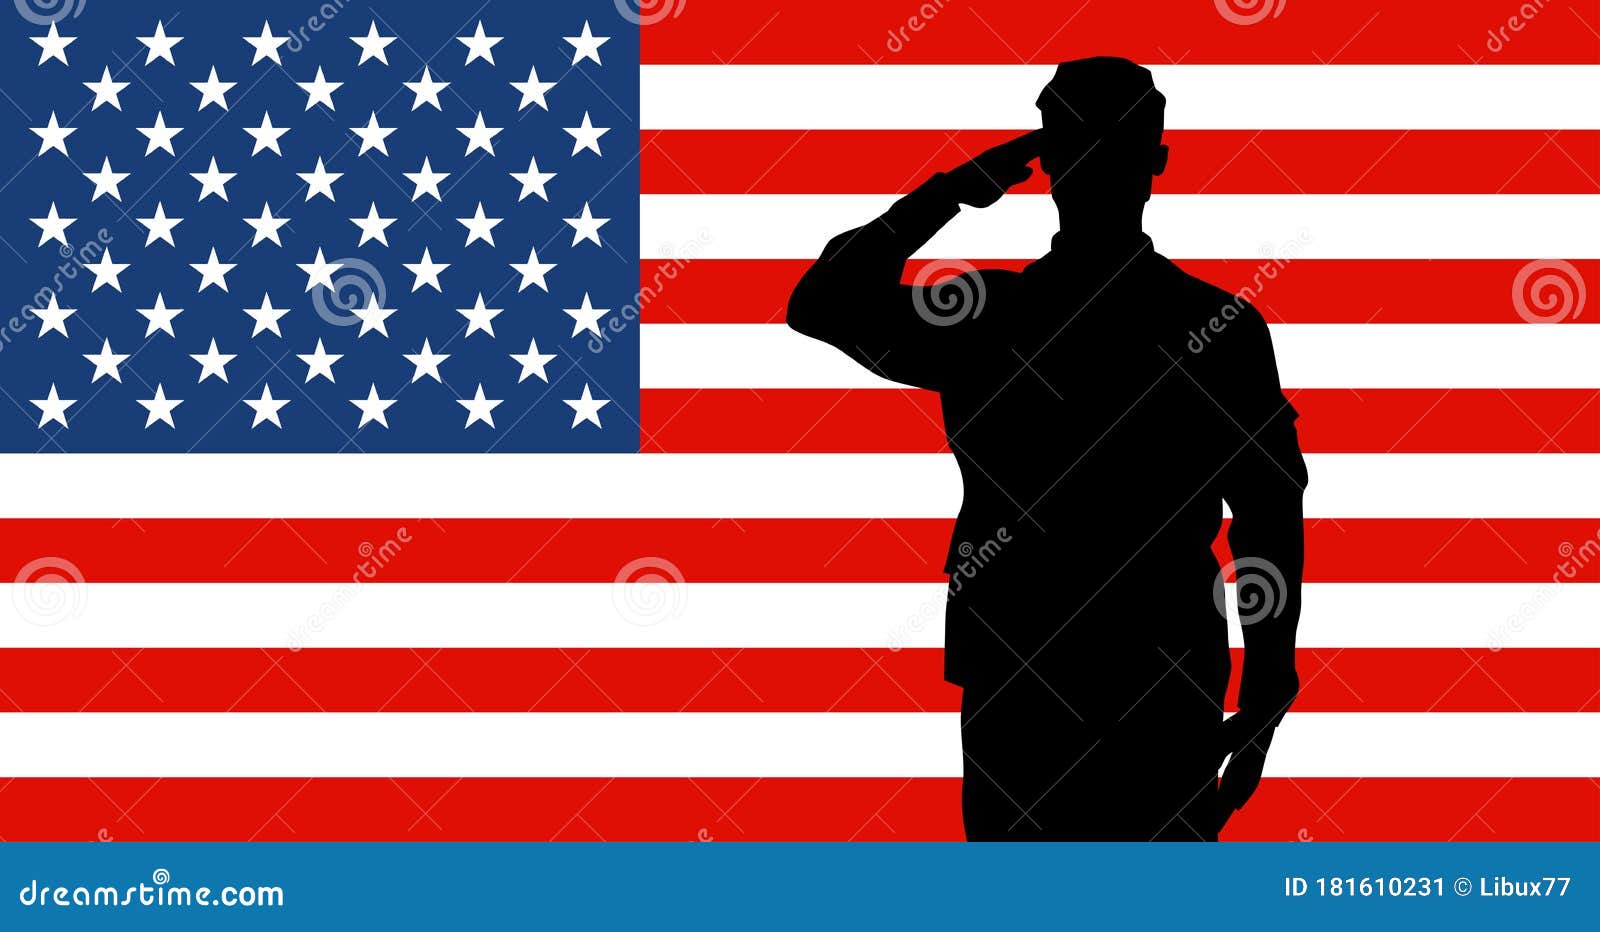 Soldiers Silhouette Saluting The USA Flag For Memorial Day Or Veterans